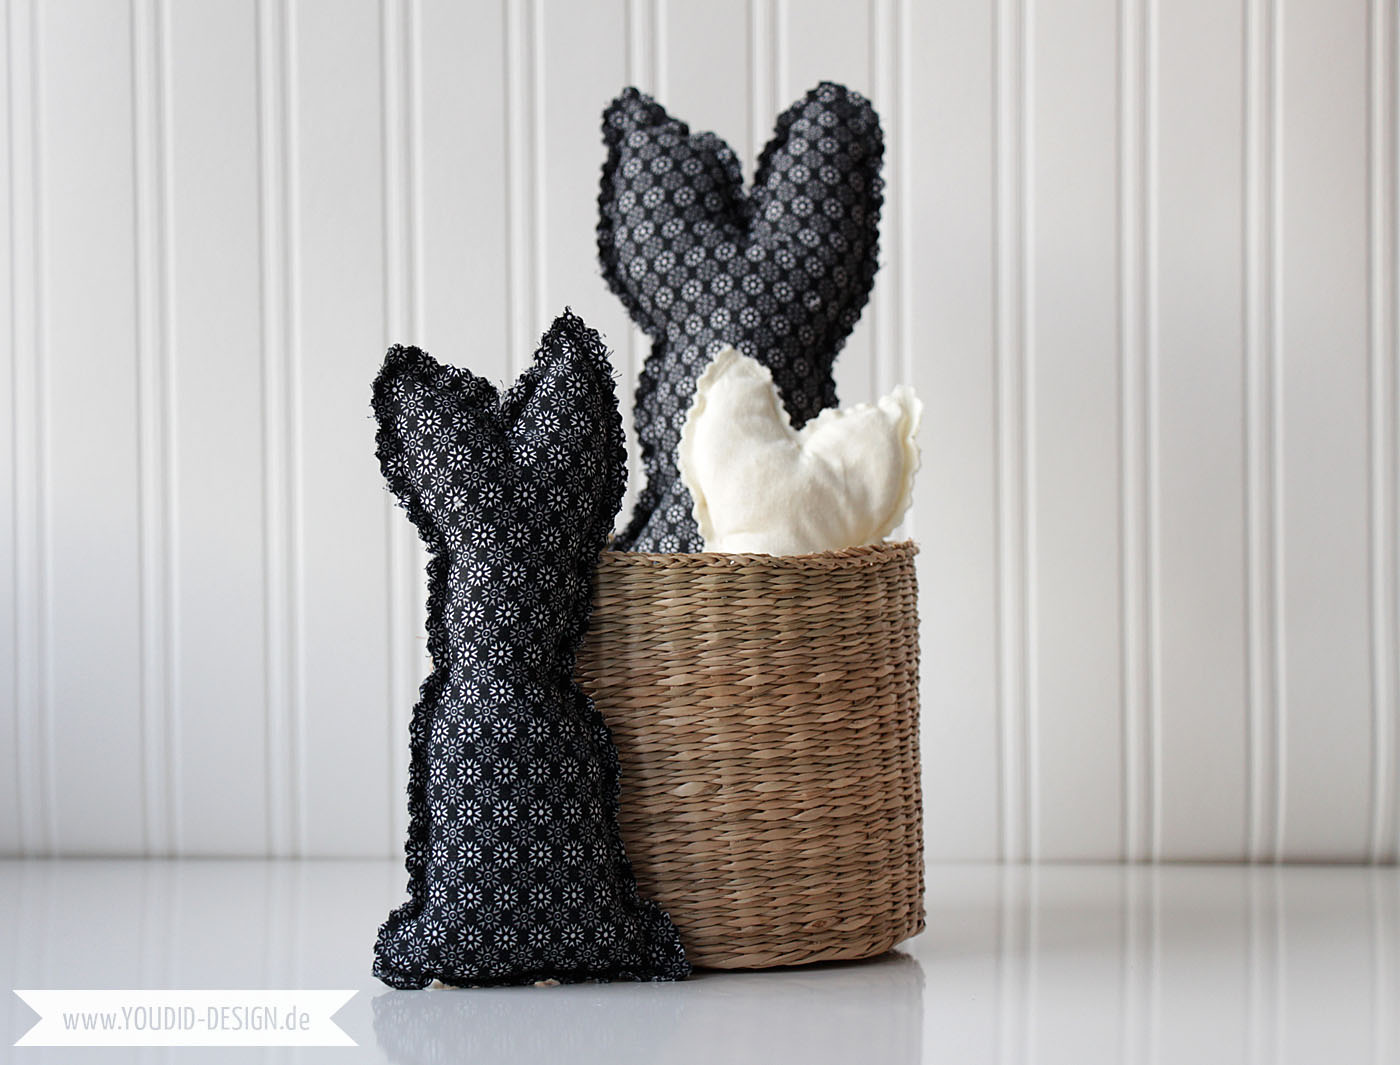 Black and White Fabric Easter Bunnies Free Sewing Pattern - Schwarz Weiss Osterhase mit Gratis Schnittmuster - Easter Decoration - Osterdekoration | www.youdid-design.de